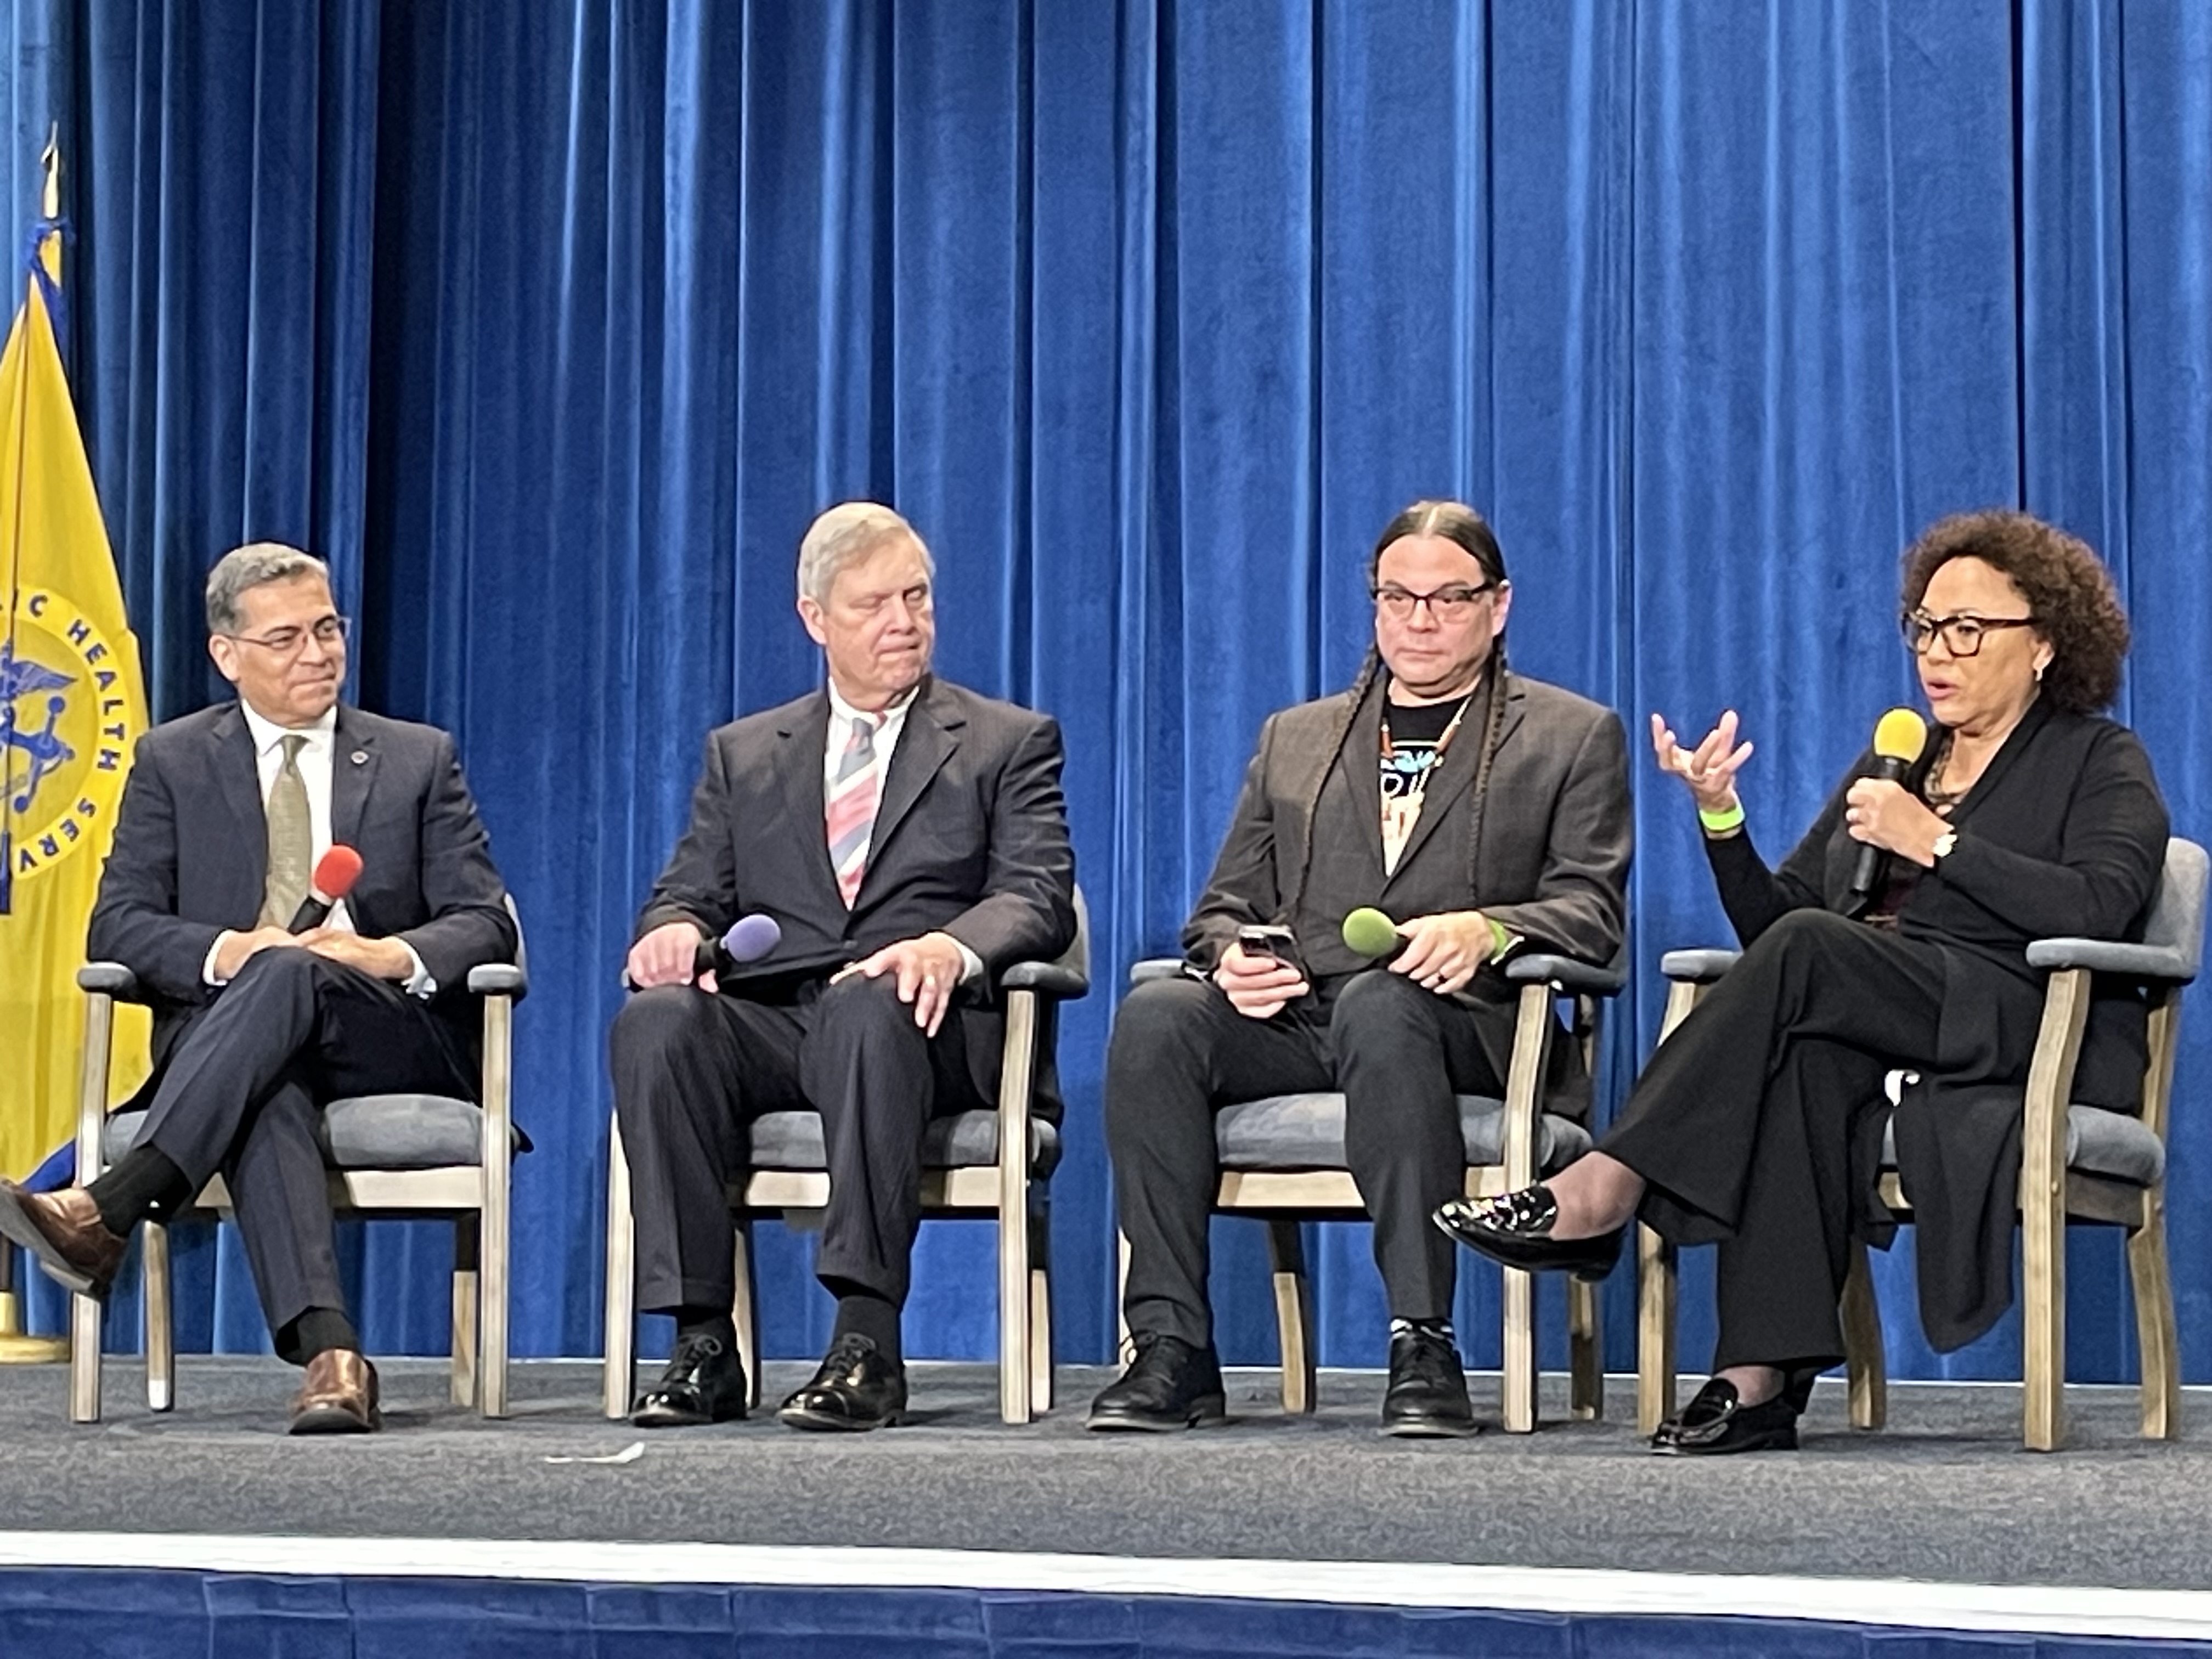 The Power and Importance of Nourishment;
Secretary Xavier Becerra, Department of Health and Human Services;
Secretary Tom Vilsack, Department of Agriculture;
Chef Sean Sherman, North American Traditional Indigenous Food Systems;
Maria Rosario Jackson, National Endowment for the Arts